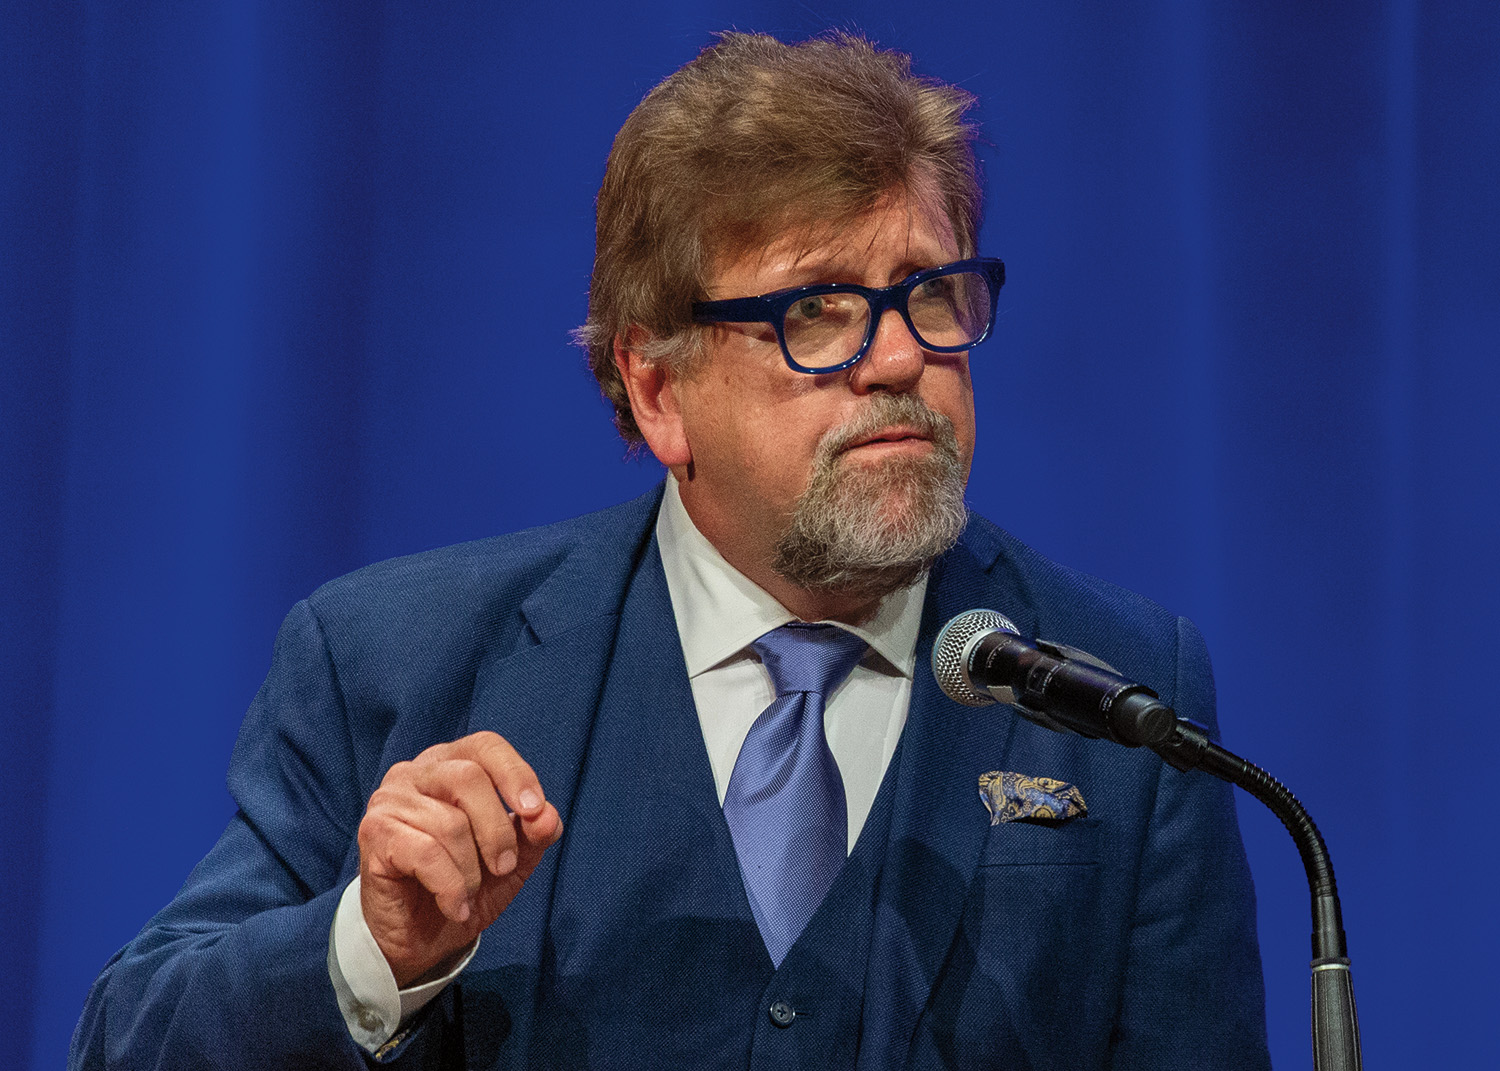 Oskar Eustis stands at a podium in front of a microphone. He has short, wispy brown hair and pale skin. He wears blue glasses, a white collared shirt, a light blue tie, and a dark blue three-piece suit.